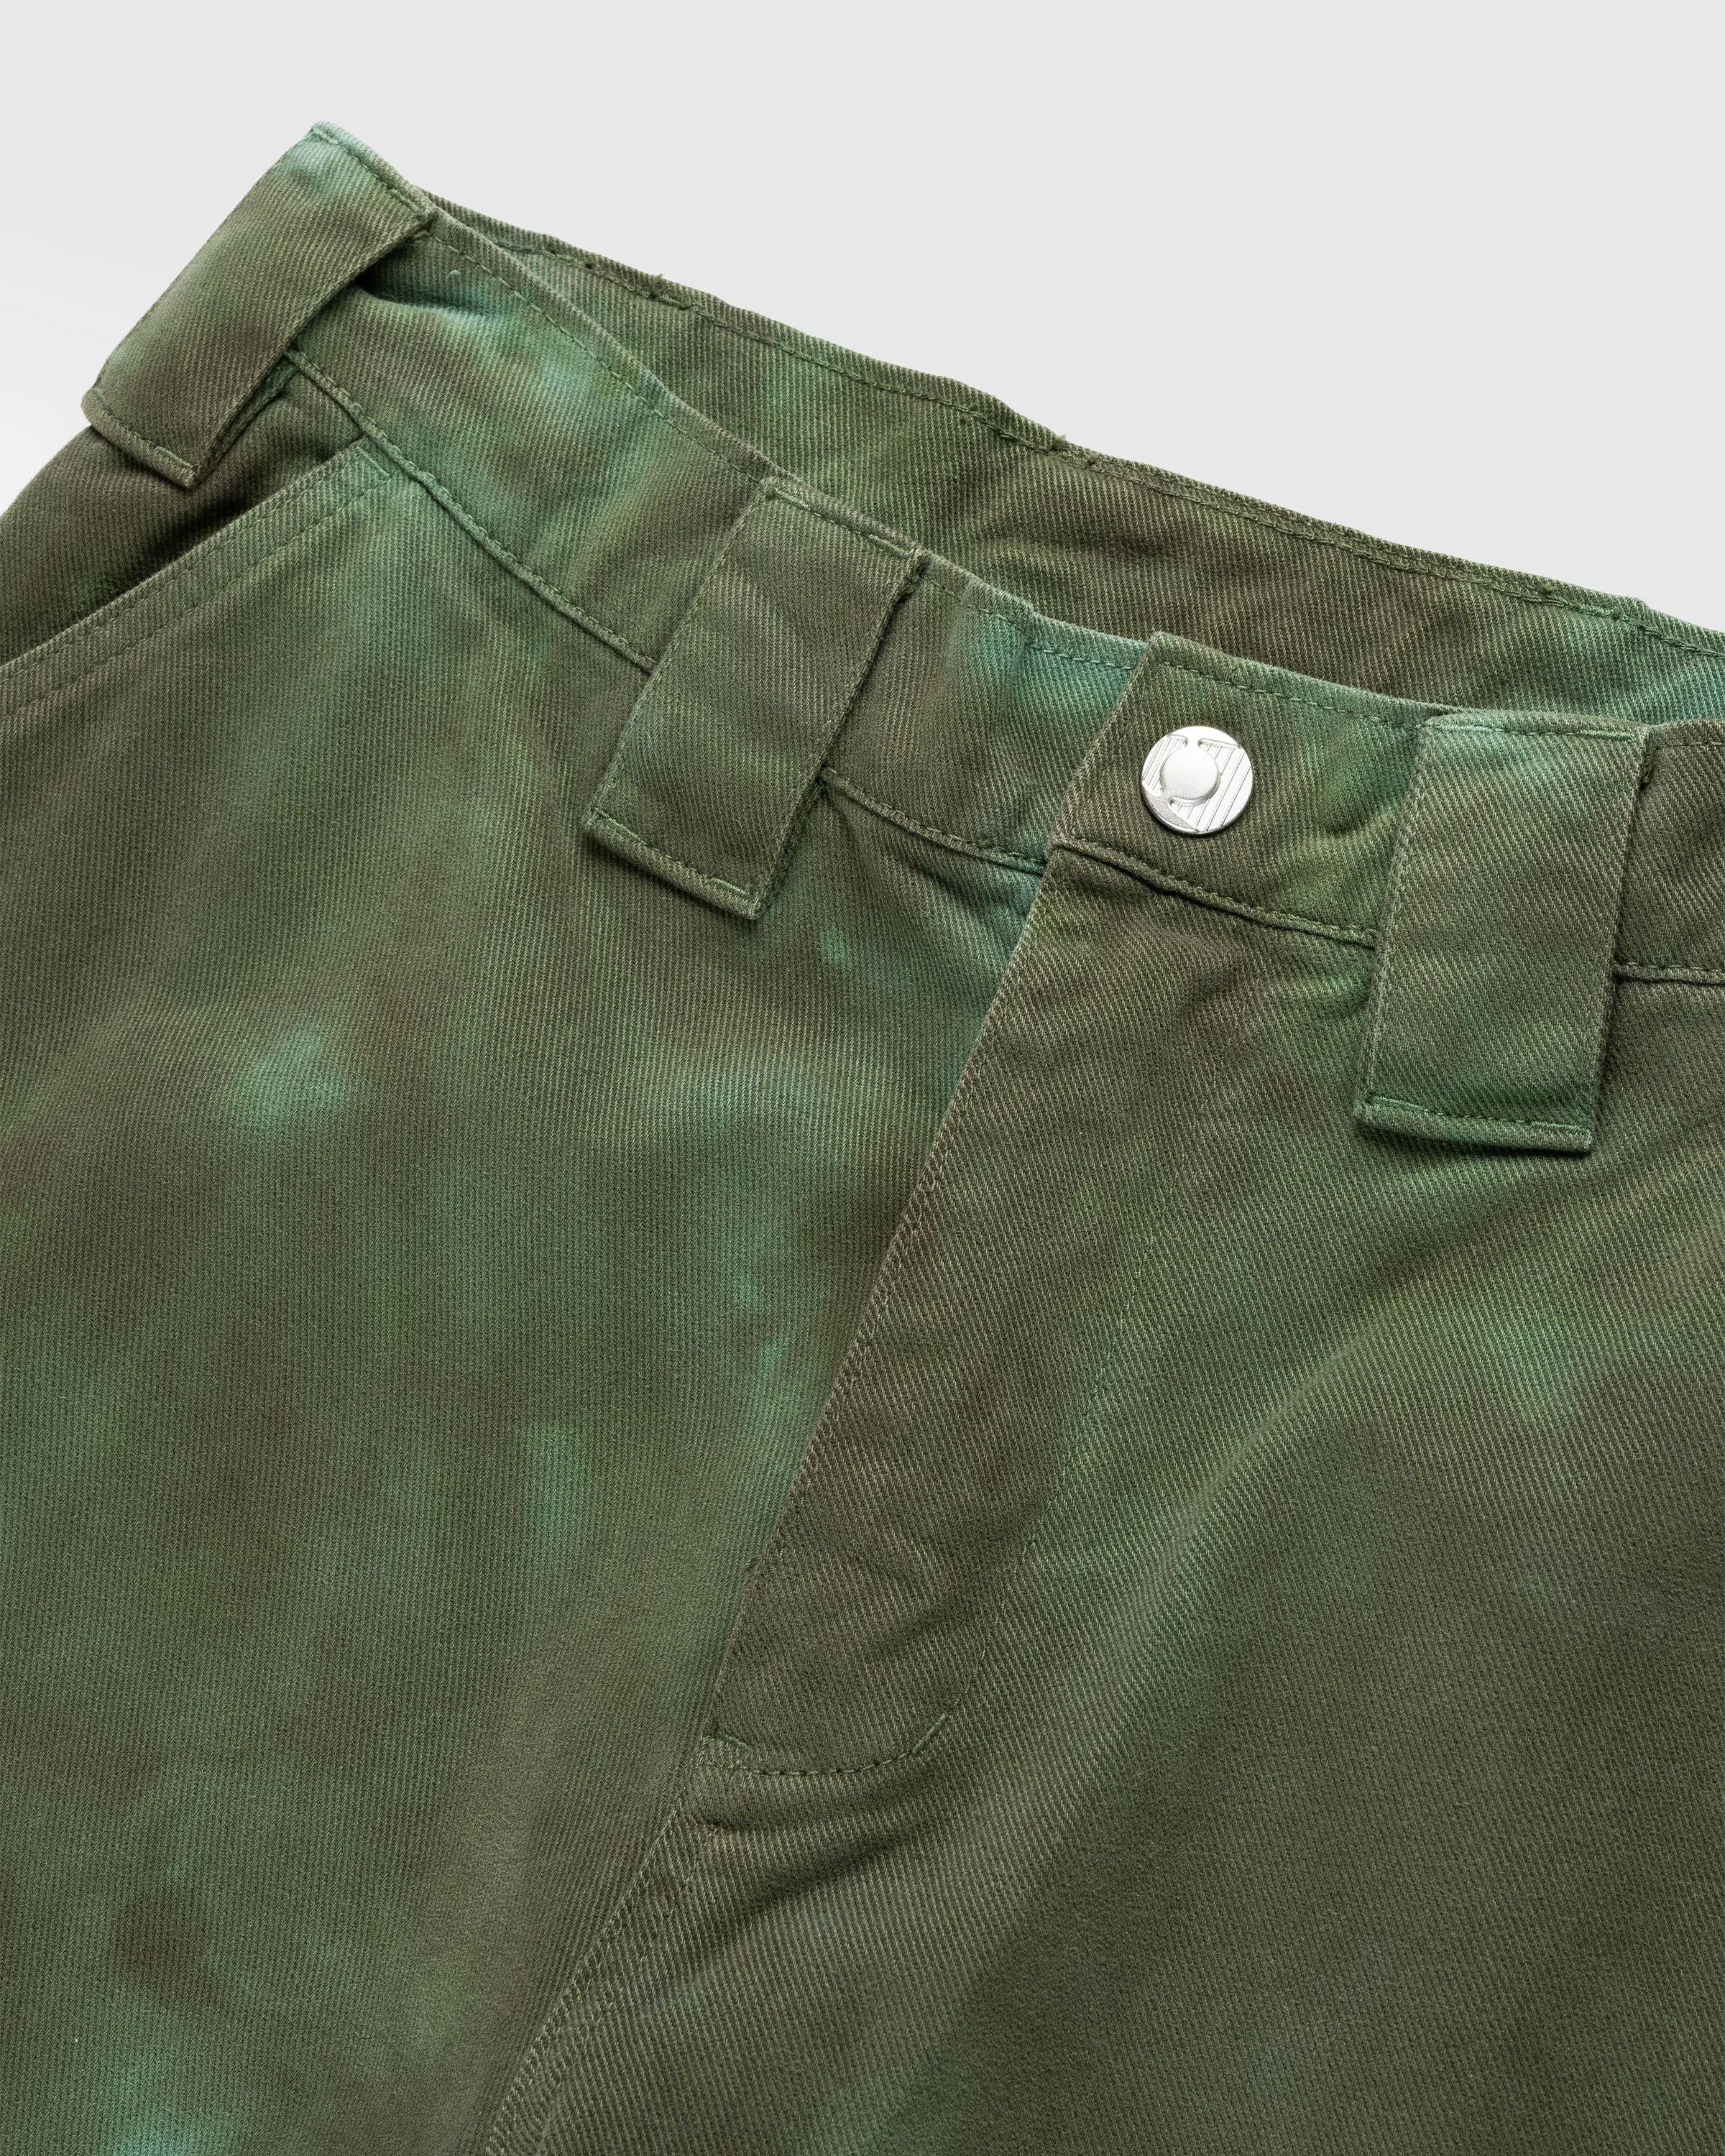 AFFXWRKS - Crease-Dye Duty Pant Green - Clothing - Green - Image 5